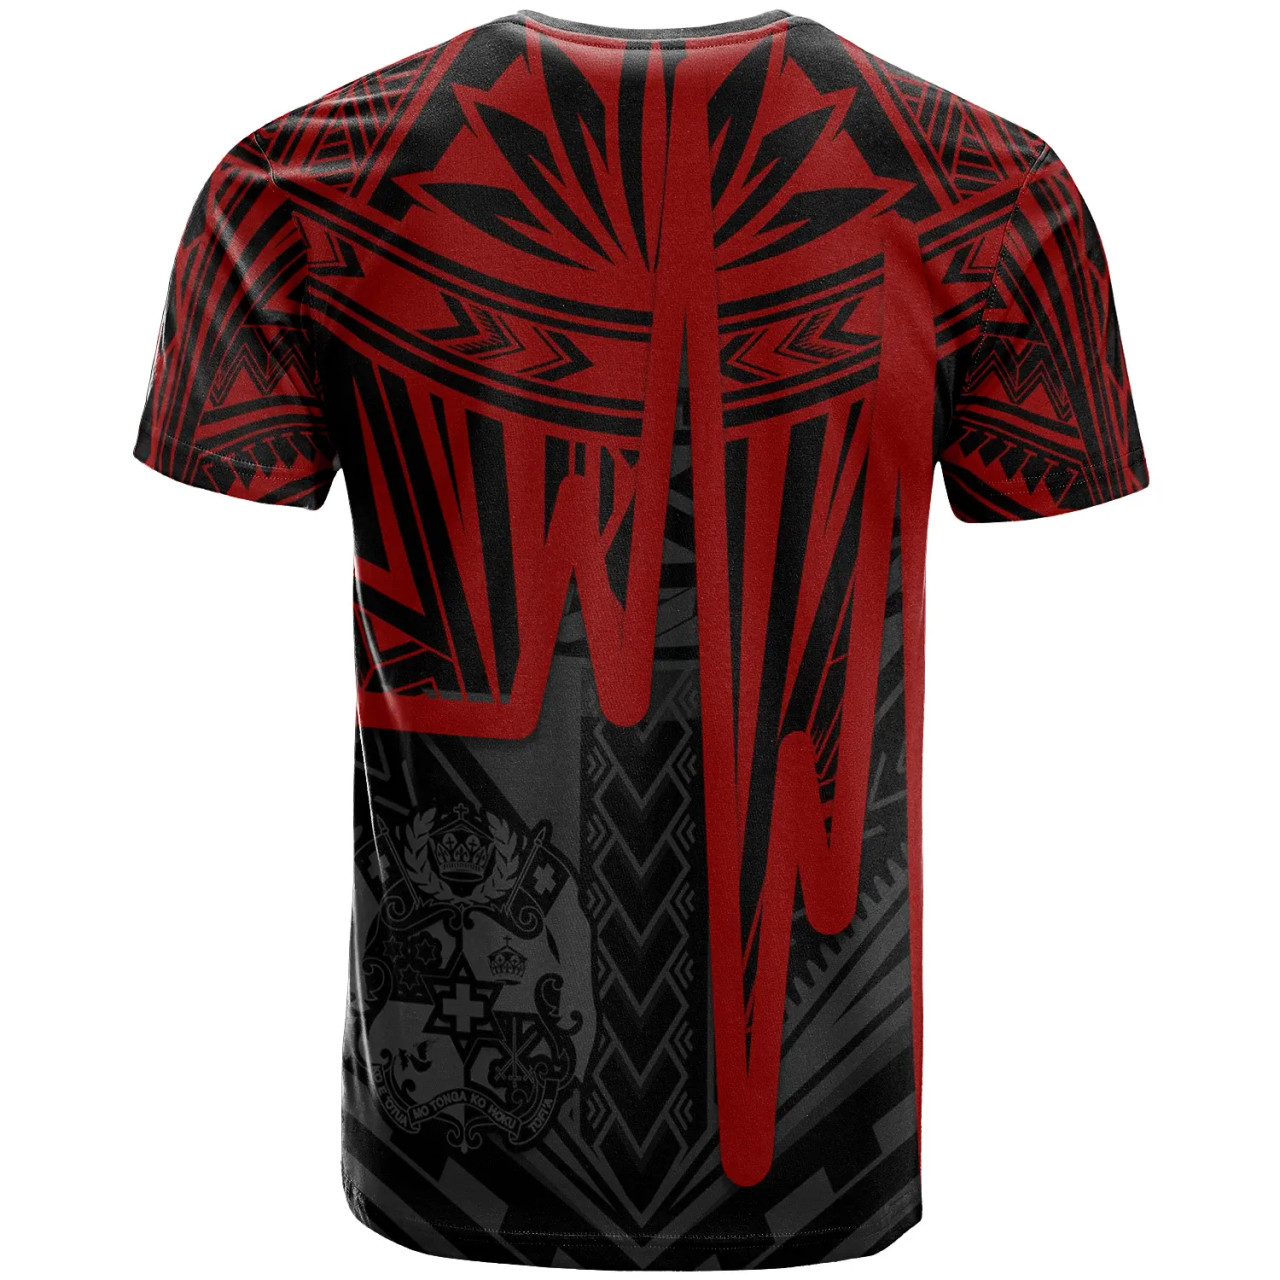 Tonga Personalised T - Shirt - Tonga Seal In Heartbeat Patterns Style (Red) 2